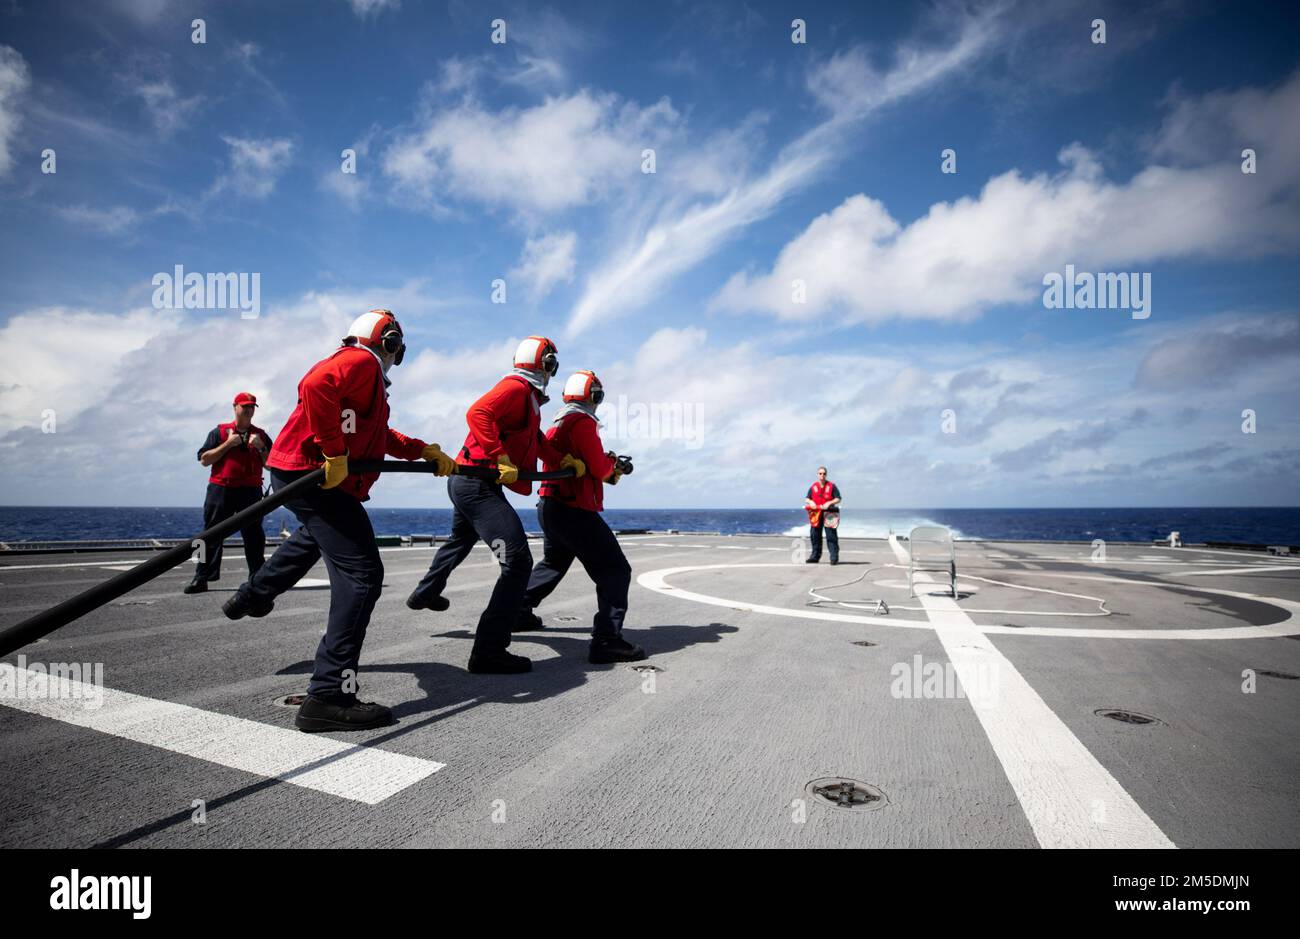 220305-N-LI768-1053  PHILIPPINE SEA (March 5, 2022) – Sailors sidestep while fighting a simulated fire on the flight deck during aviation damage control training aboard the Independence-variant littoral combat ship USS Tulsa (LCS 16). Tulsa, part of Destroyer Squadron (DESRON) 7, is on a rotational deployment, operating in the U.S. 7th Fleet area of operations to enhance interoperability with partners and serve as a ready-response force in support of a free and open Indo-Pacific region. Stock Photo